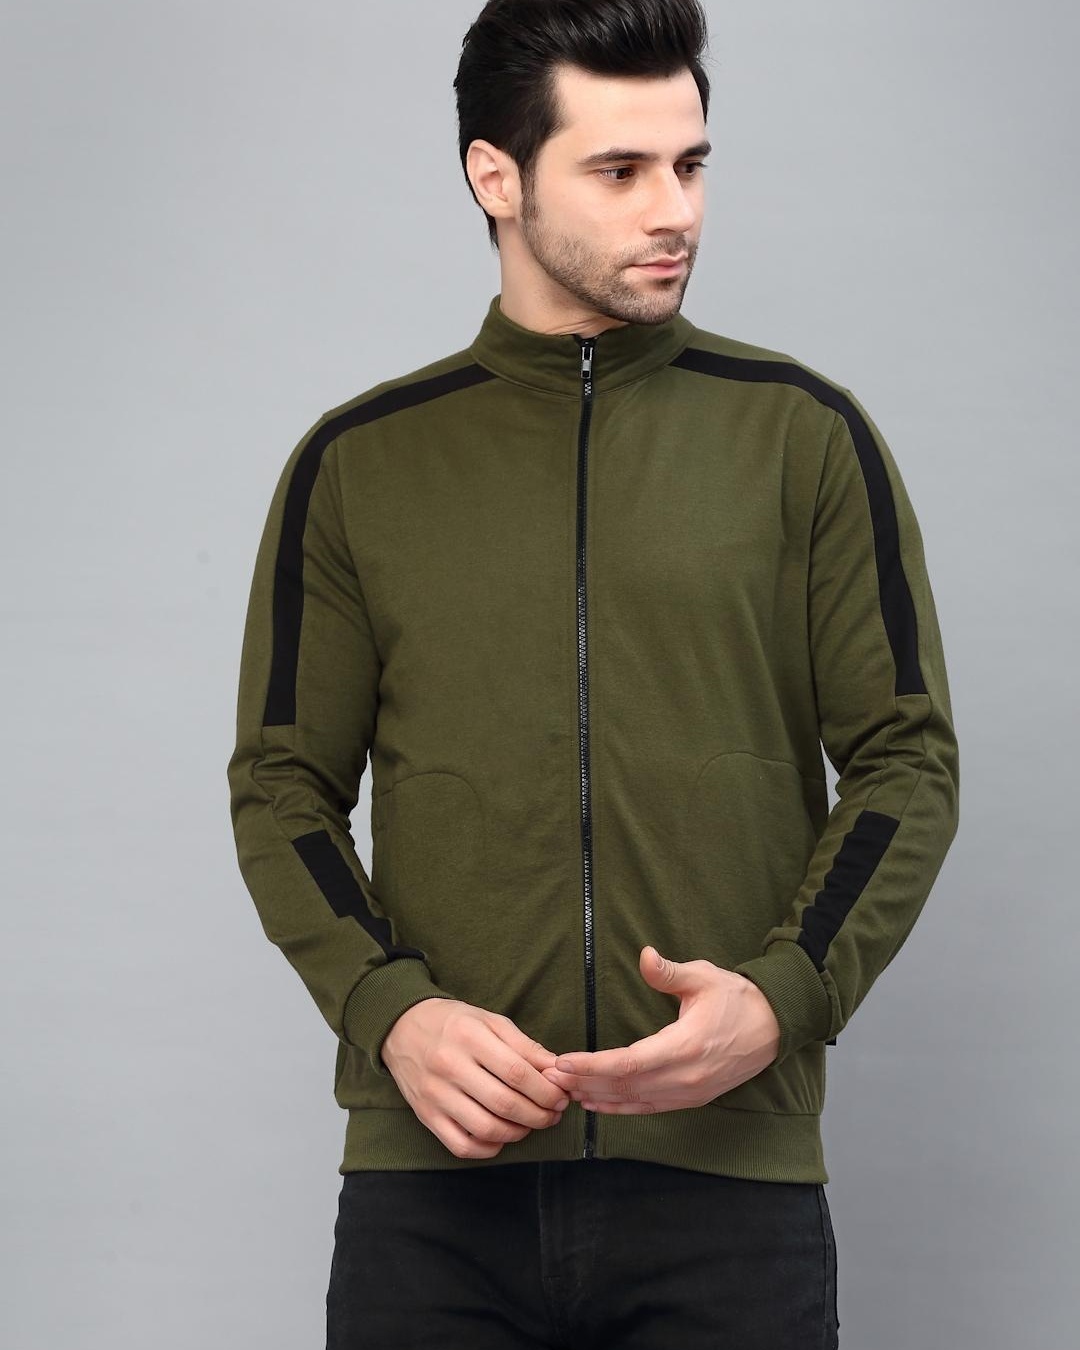 Mens Green Down Parka Jacket With Hood Fashionable Winter Green Puffer Coat  For Men, Windbreaker And Asian Style From Lxs13888, $107.21 | DHgate.Com